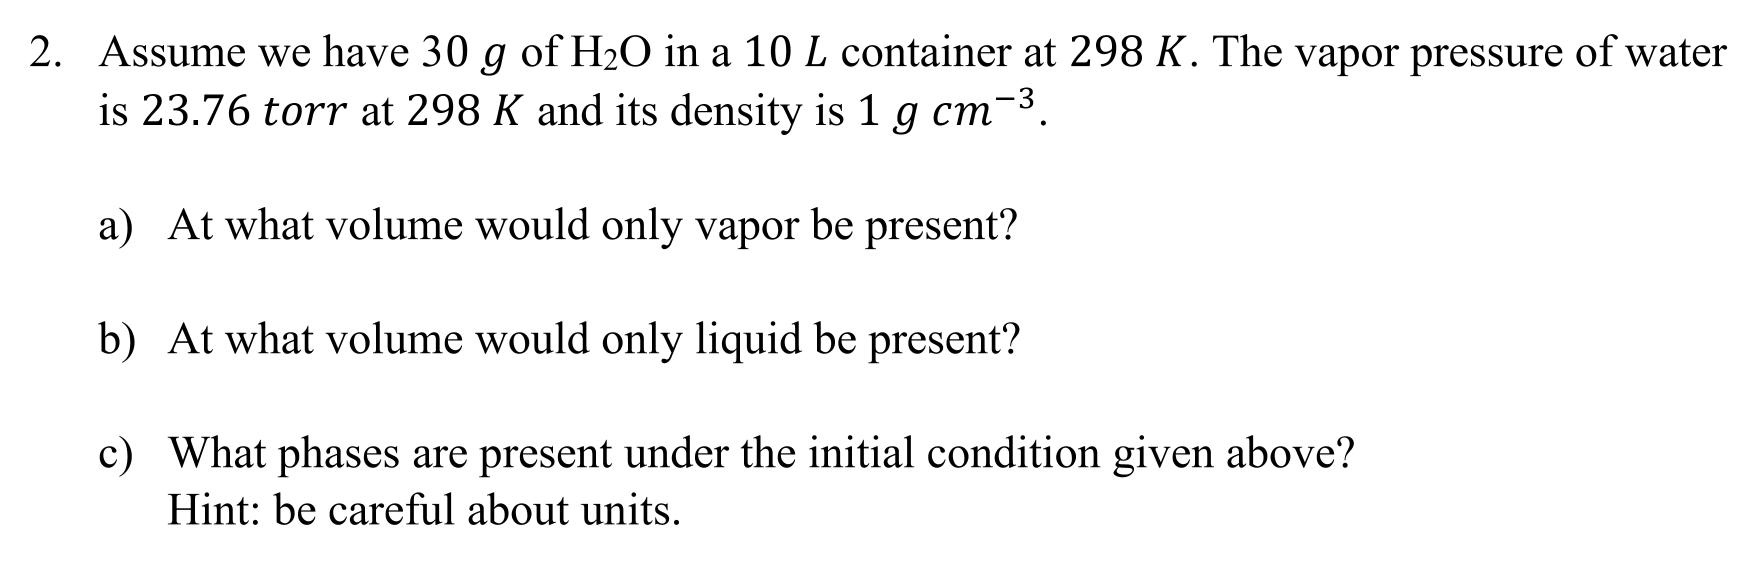 2. Assume we have 30 g of HO in a 10 L container at 298 K. The vapor pressure of water is 23.76 torr at 298 K